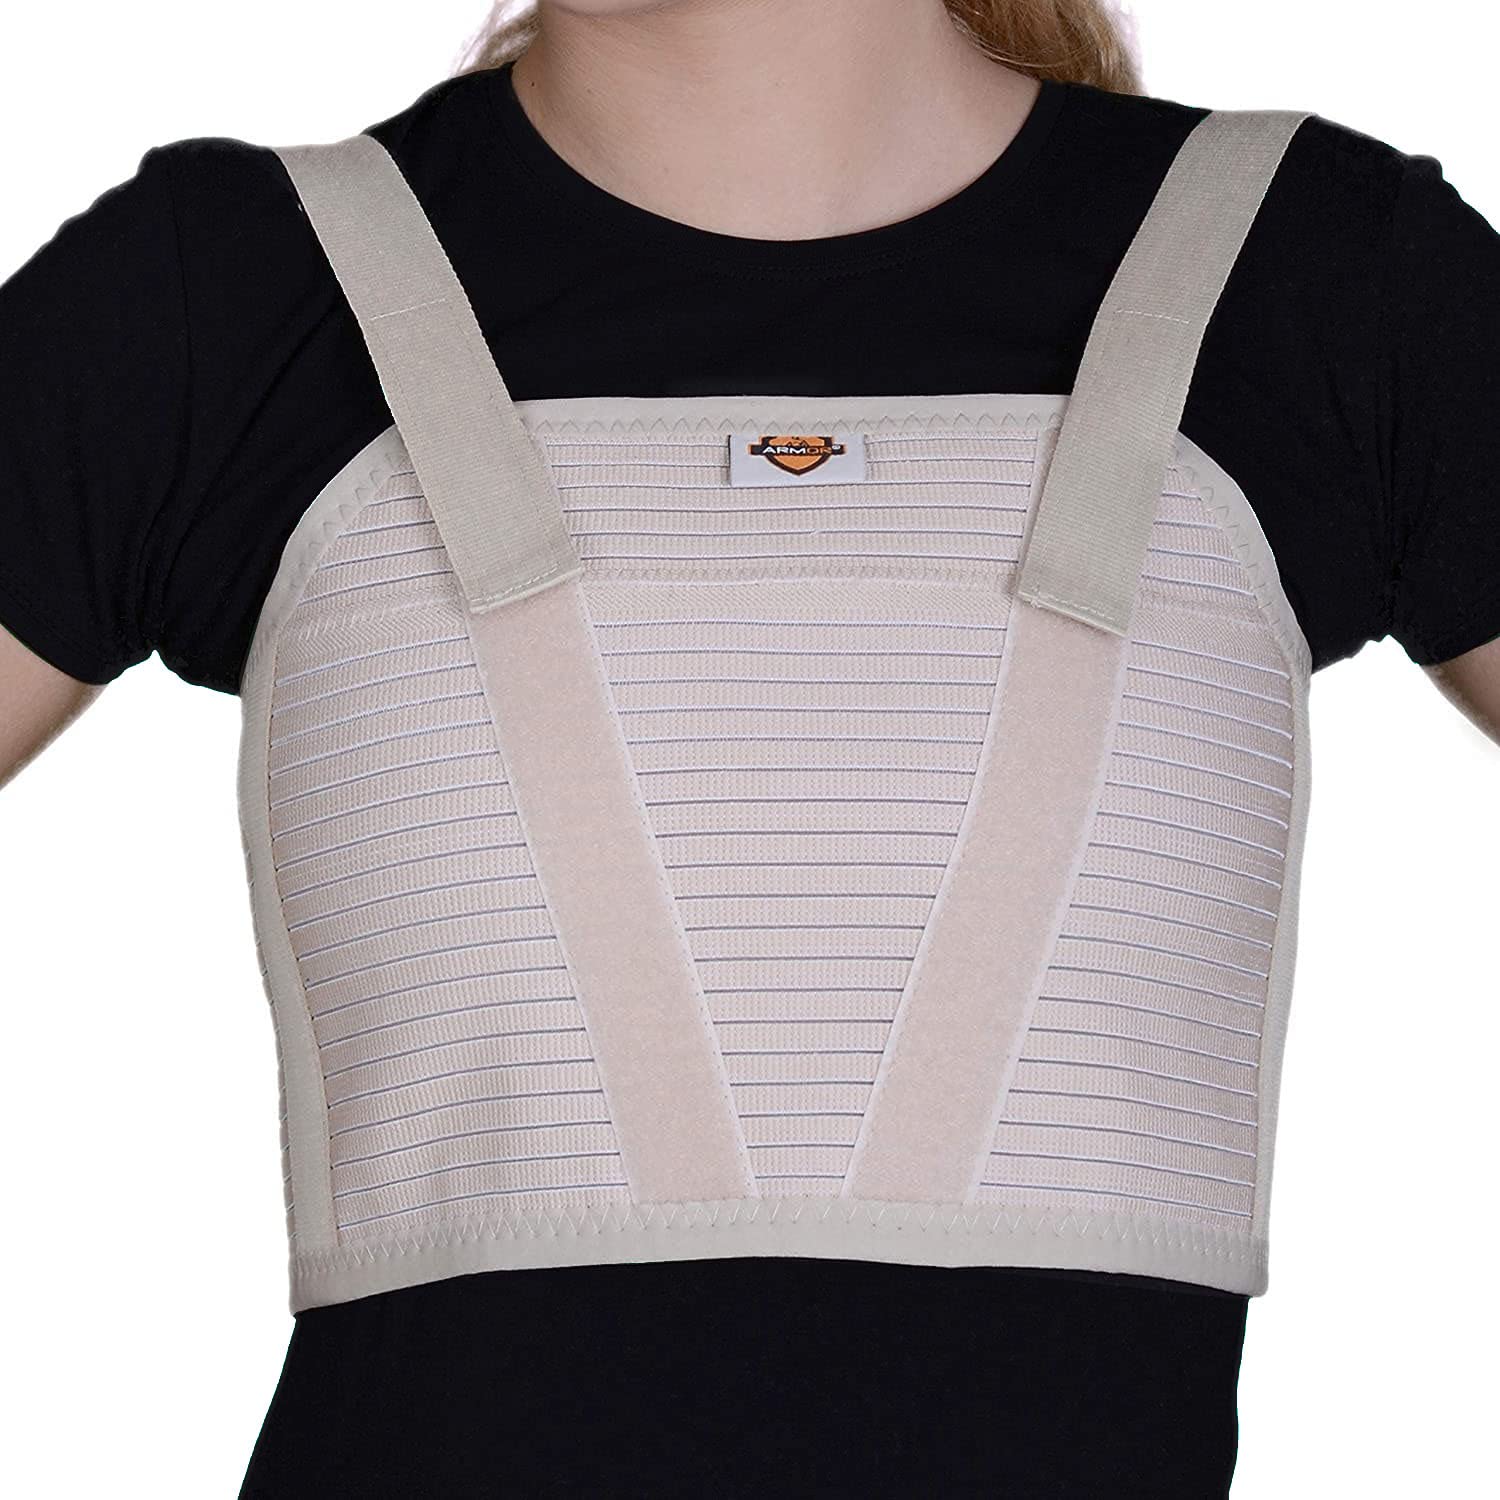 Armor Adult Unisex Chest Support Brace to Stabilize India